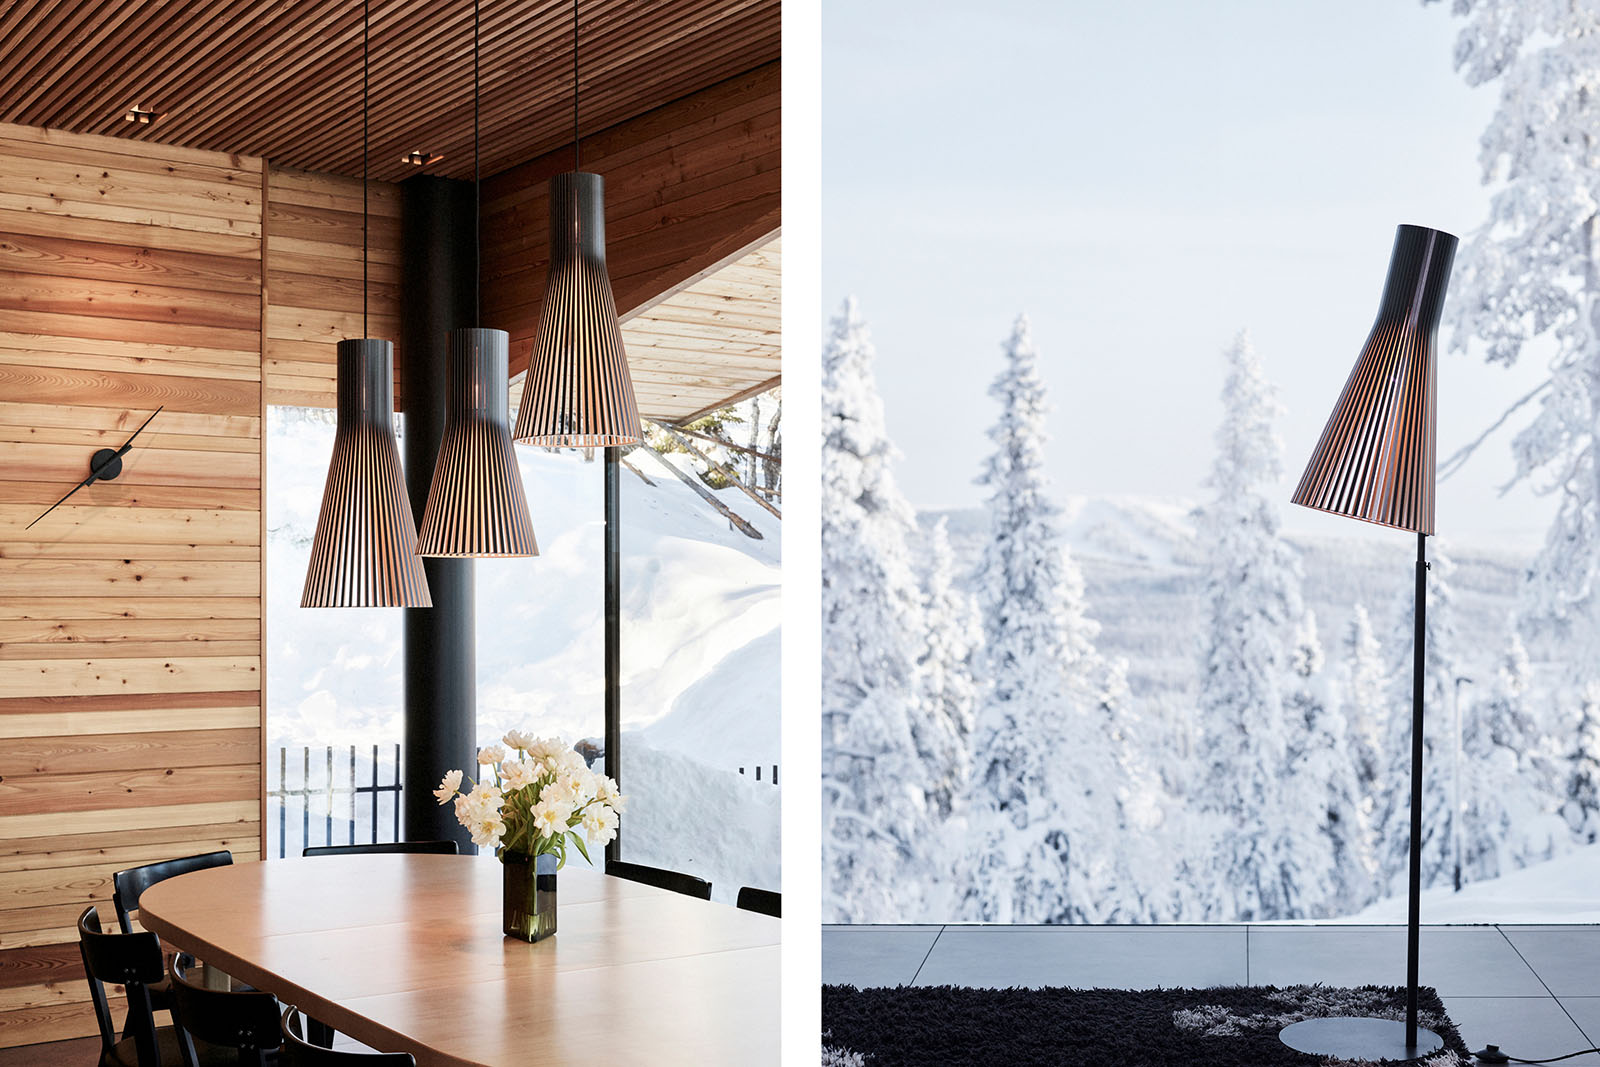 Pendant lamps above a table and floor lamp in front of a snowy view.